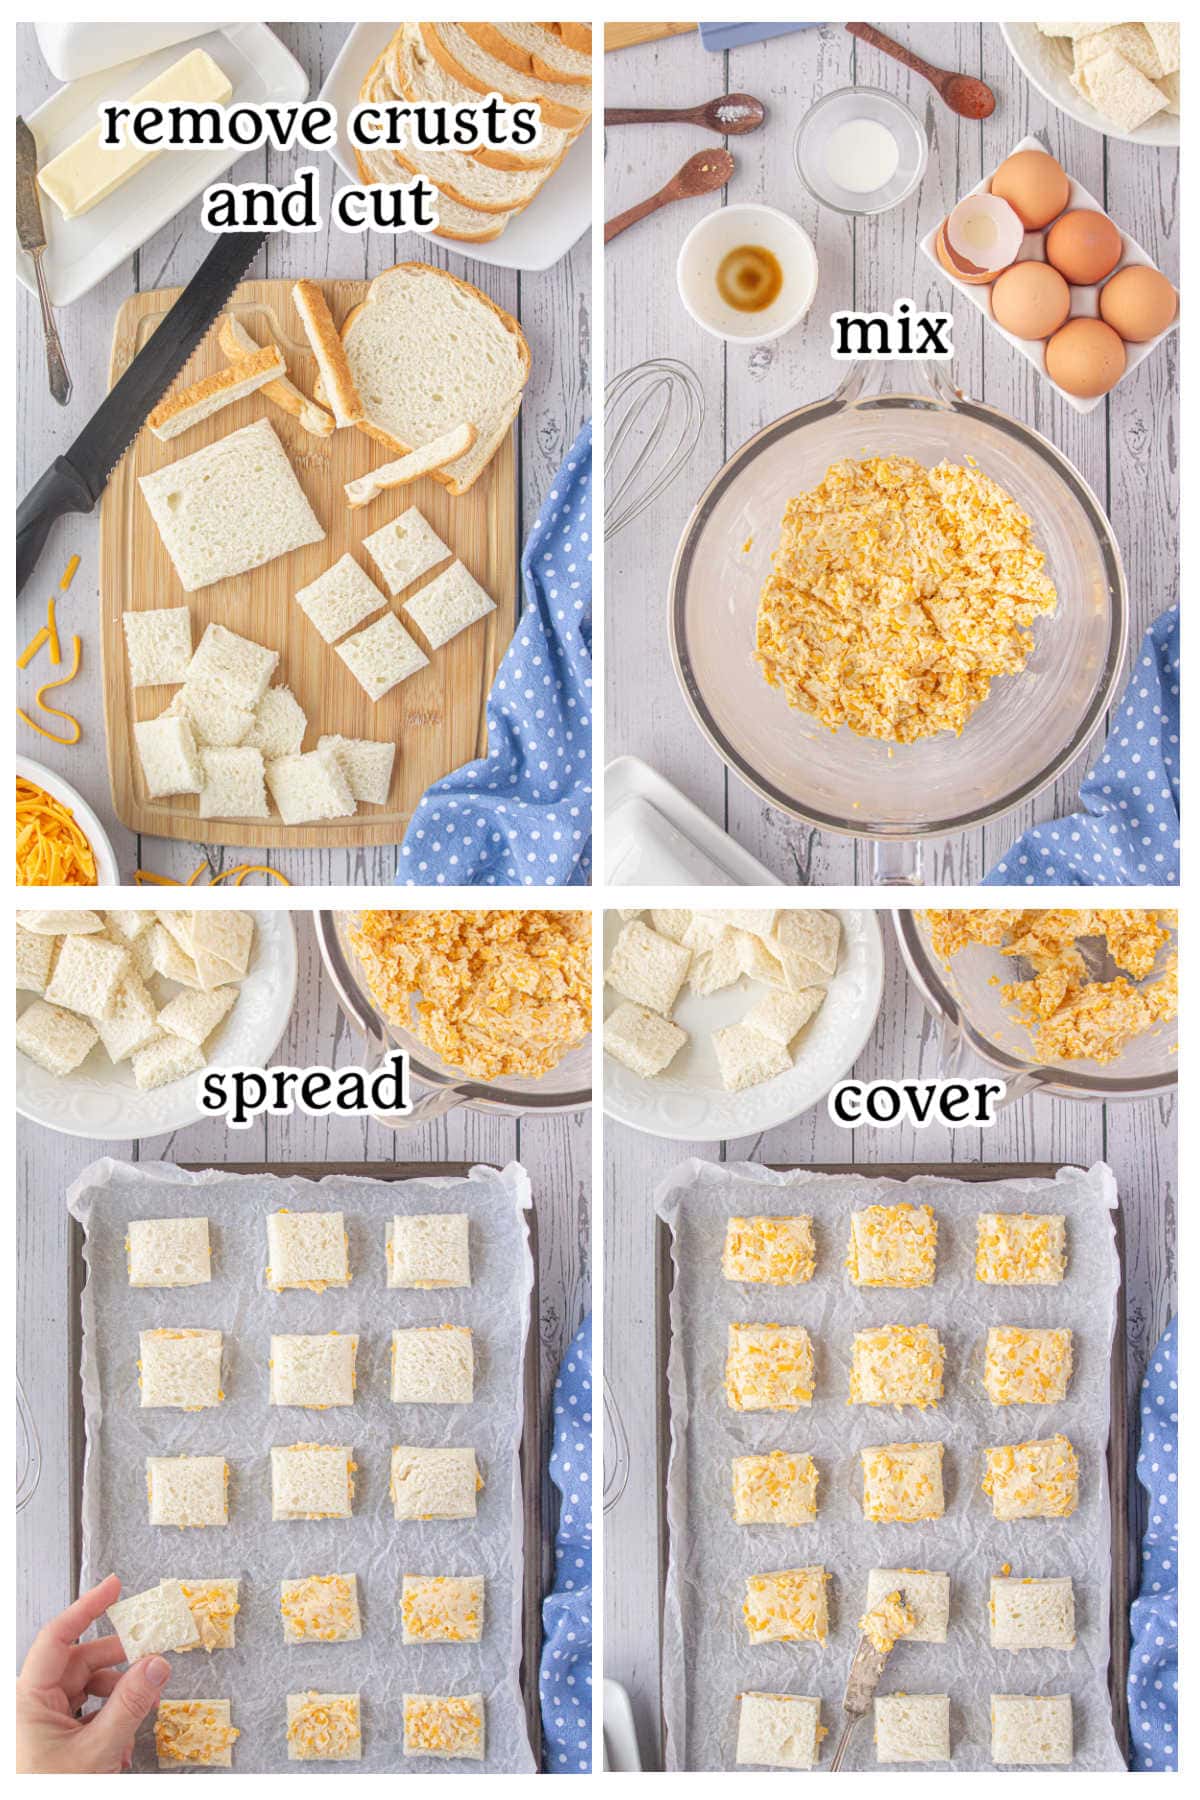 Four overhead images with text overlay depicting the recipe steps.